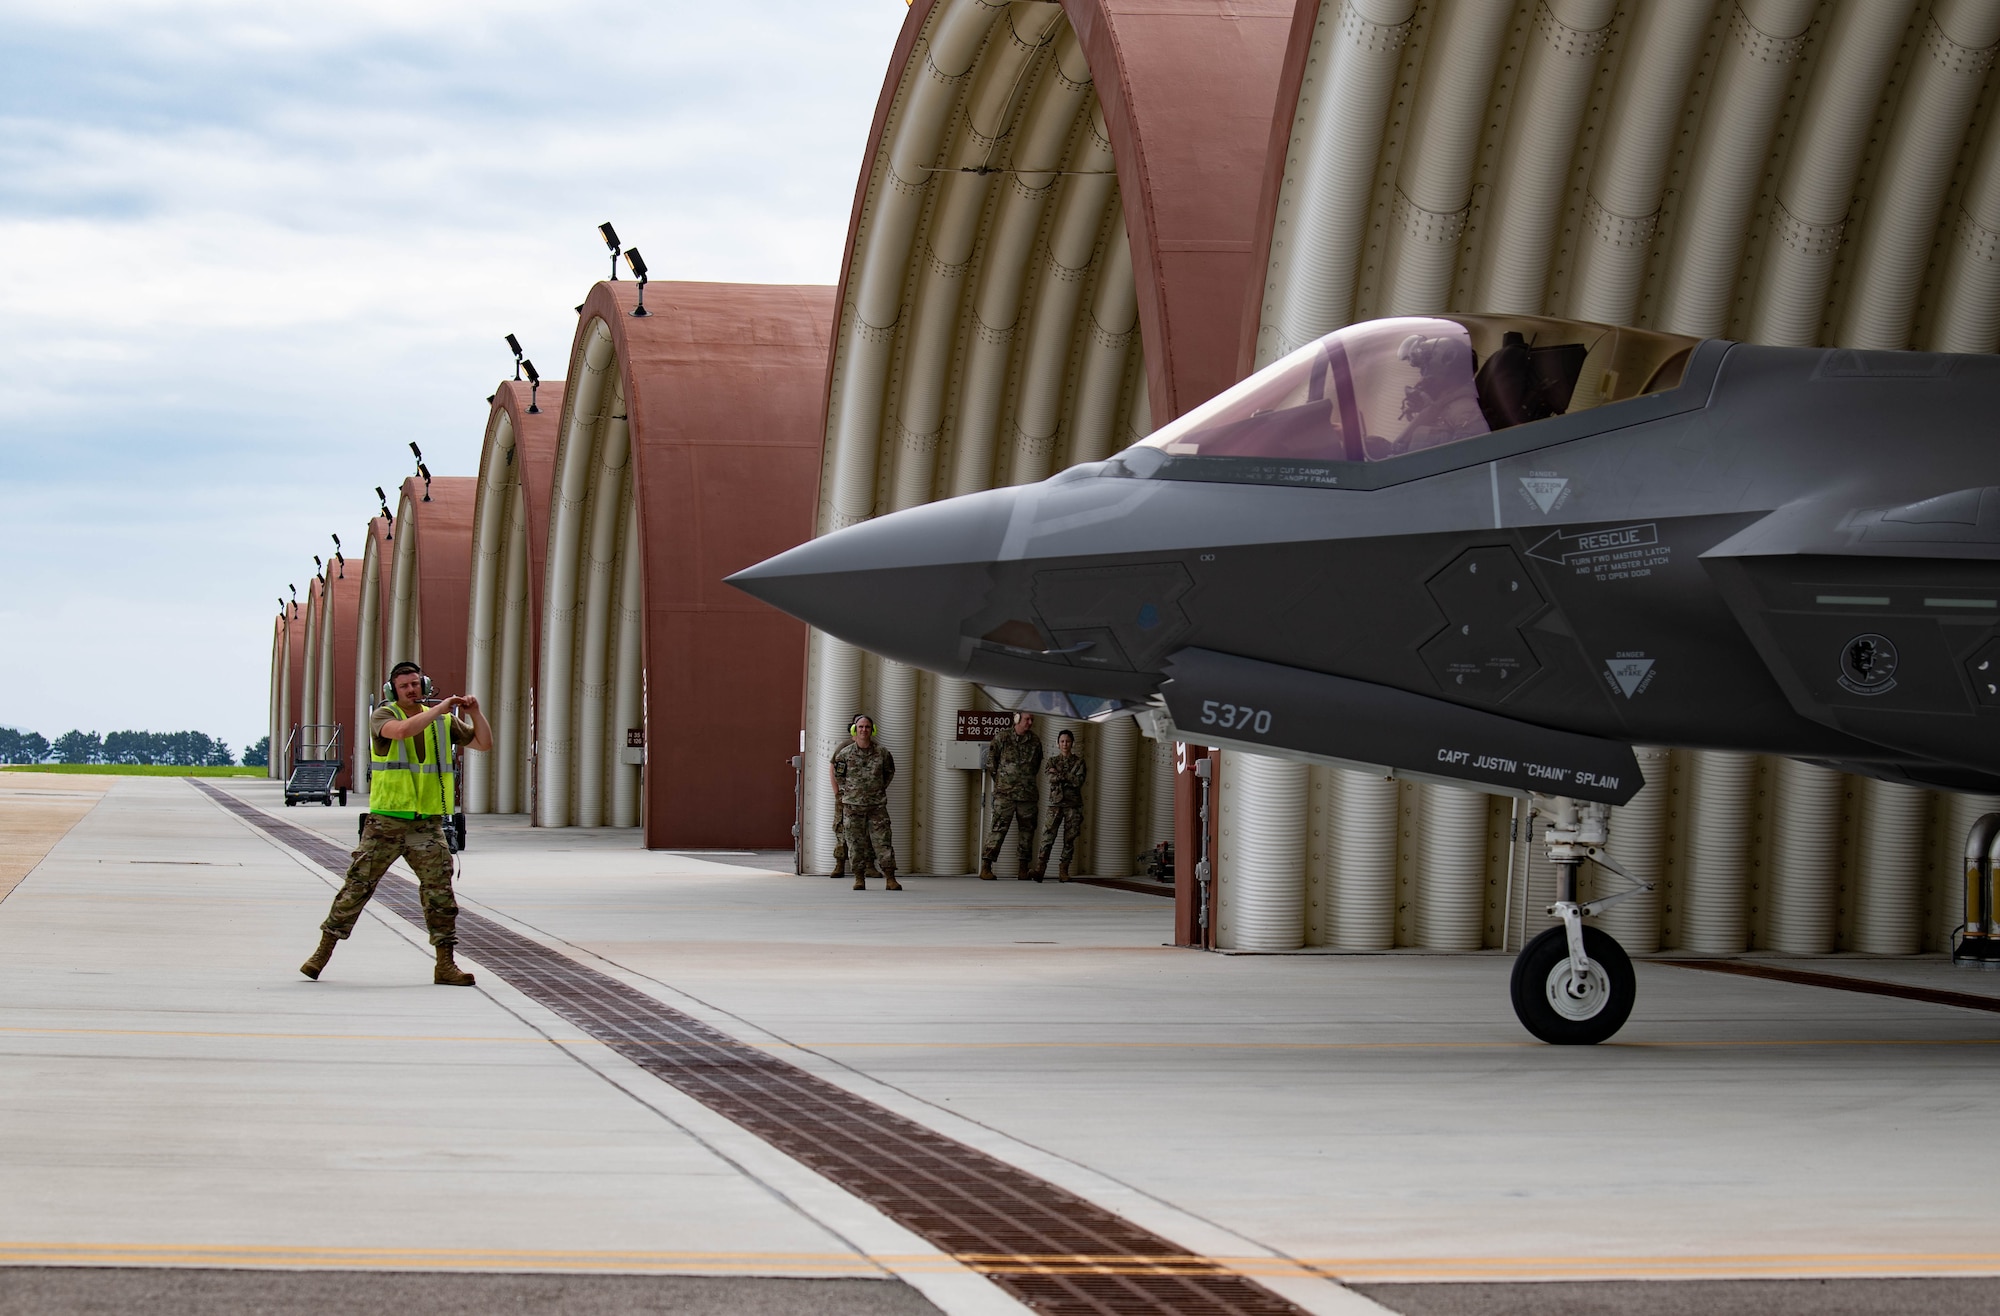 Senior Airman Thomas Trail, 354th Aircraft Maintenance Squadron maintainer, signals an F-35A Lightning II pilot at Kunsan Air Base, Republic of Korea, July 5, 2022. U.S. Air Force F-35 aircraft from Eielson Air Force Base, Alaska arrived in the Republic of Korea to conduct training flights with ROKAF
to enhance interoperability between the two Air Forces on and around the Korean Peninsula. (U.S. Air Force photo by Senior Airman Shannon Braaten)